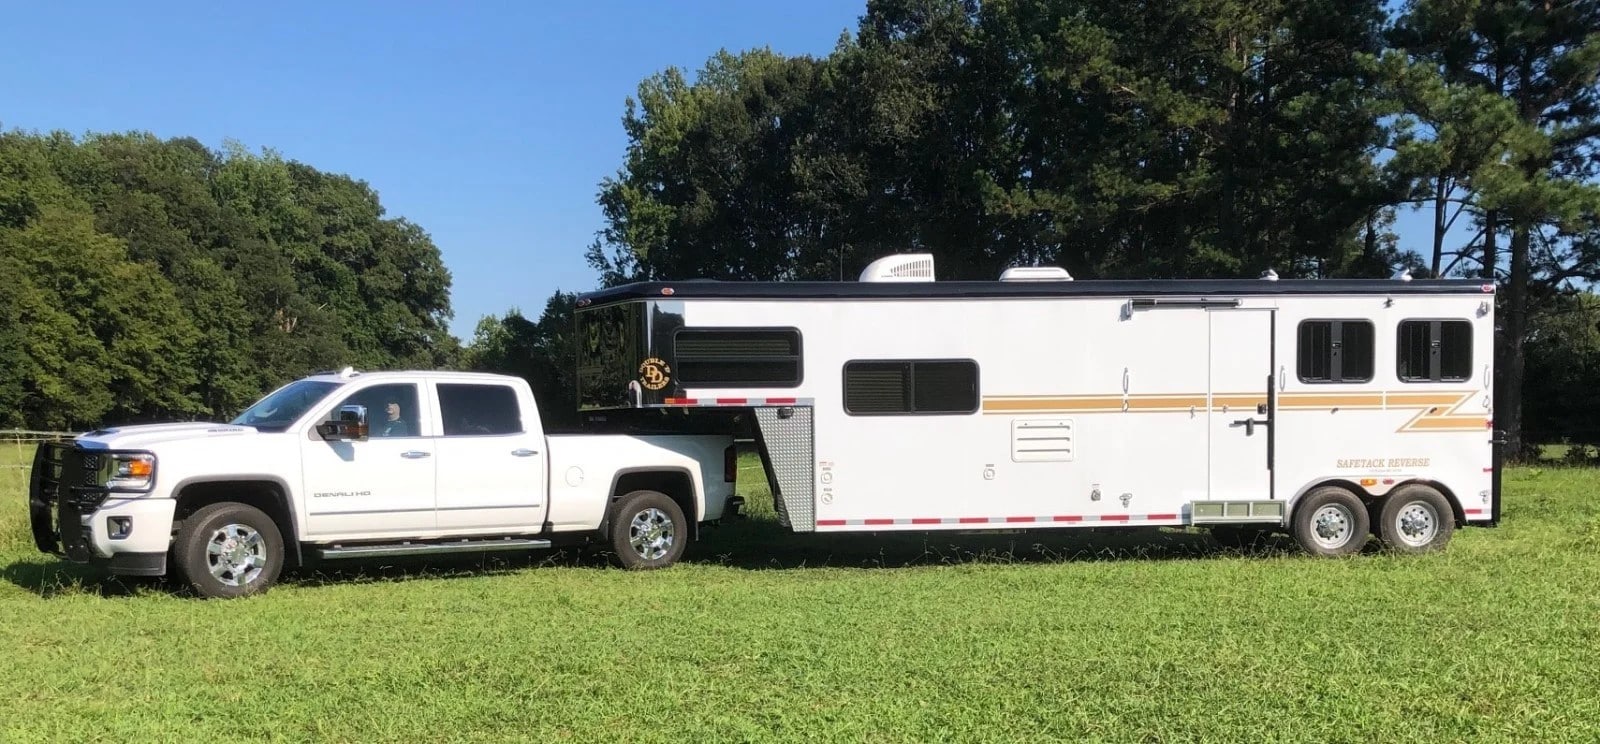 SafeTack Reverse Living Quarters Horse Trailer hitched to a tow truck. 